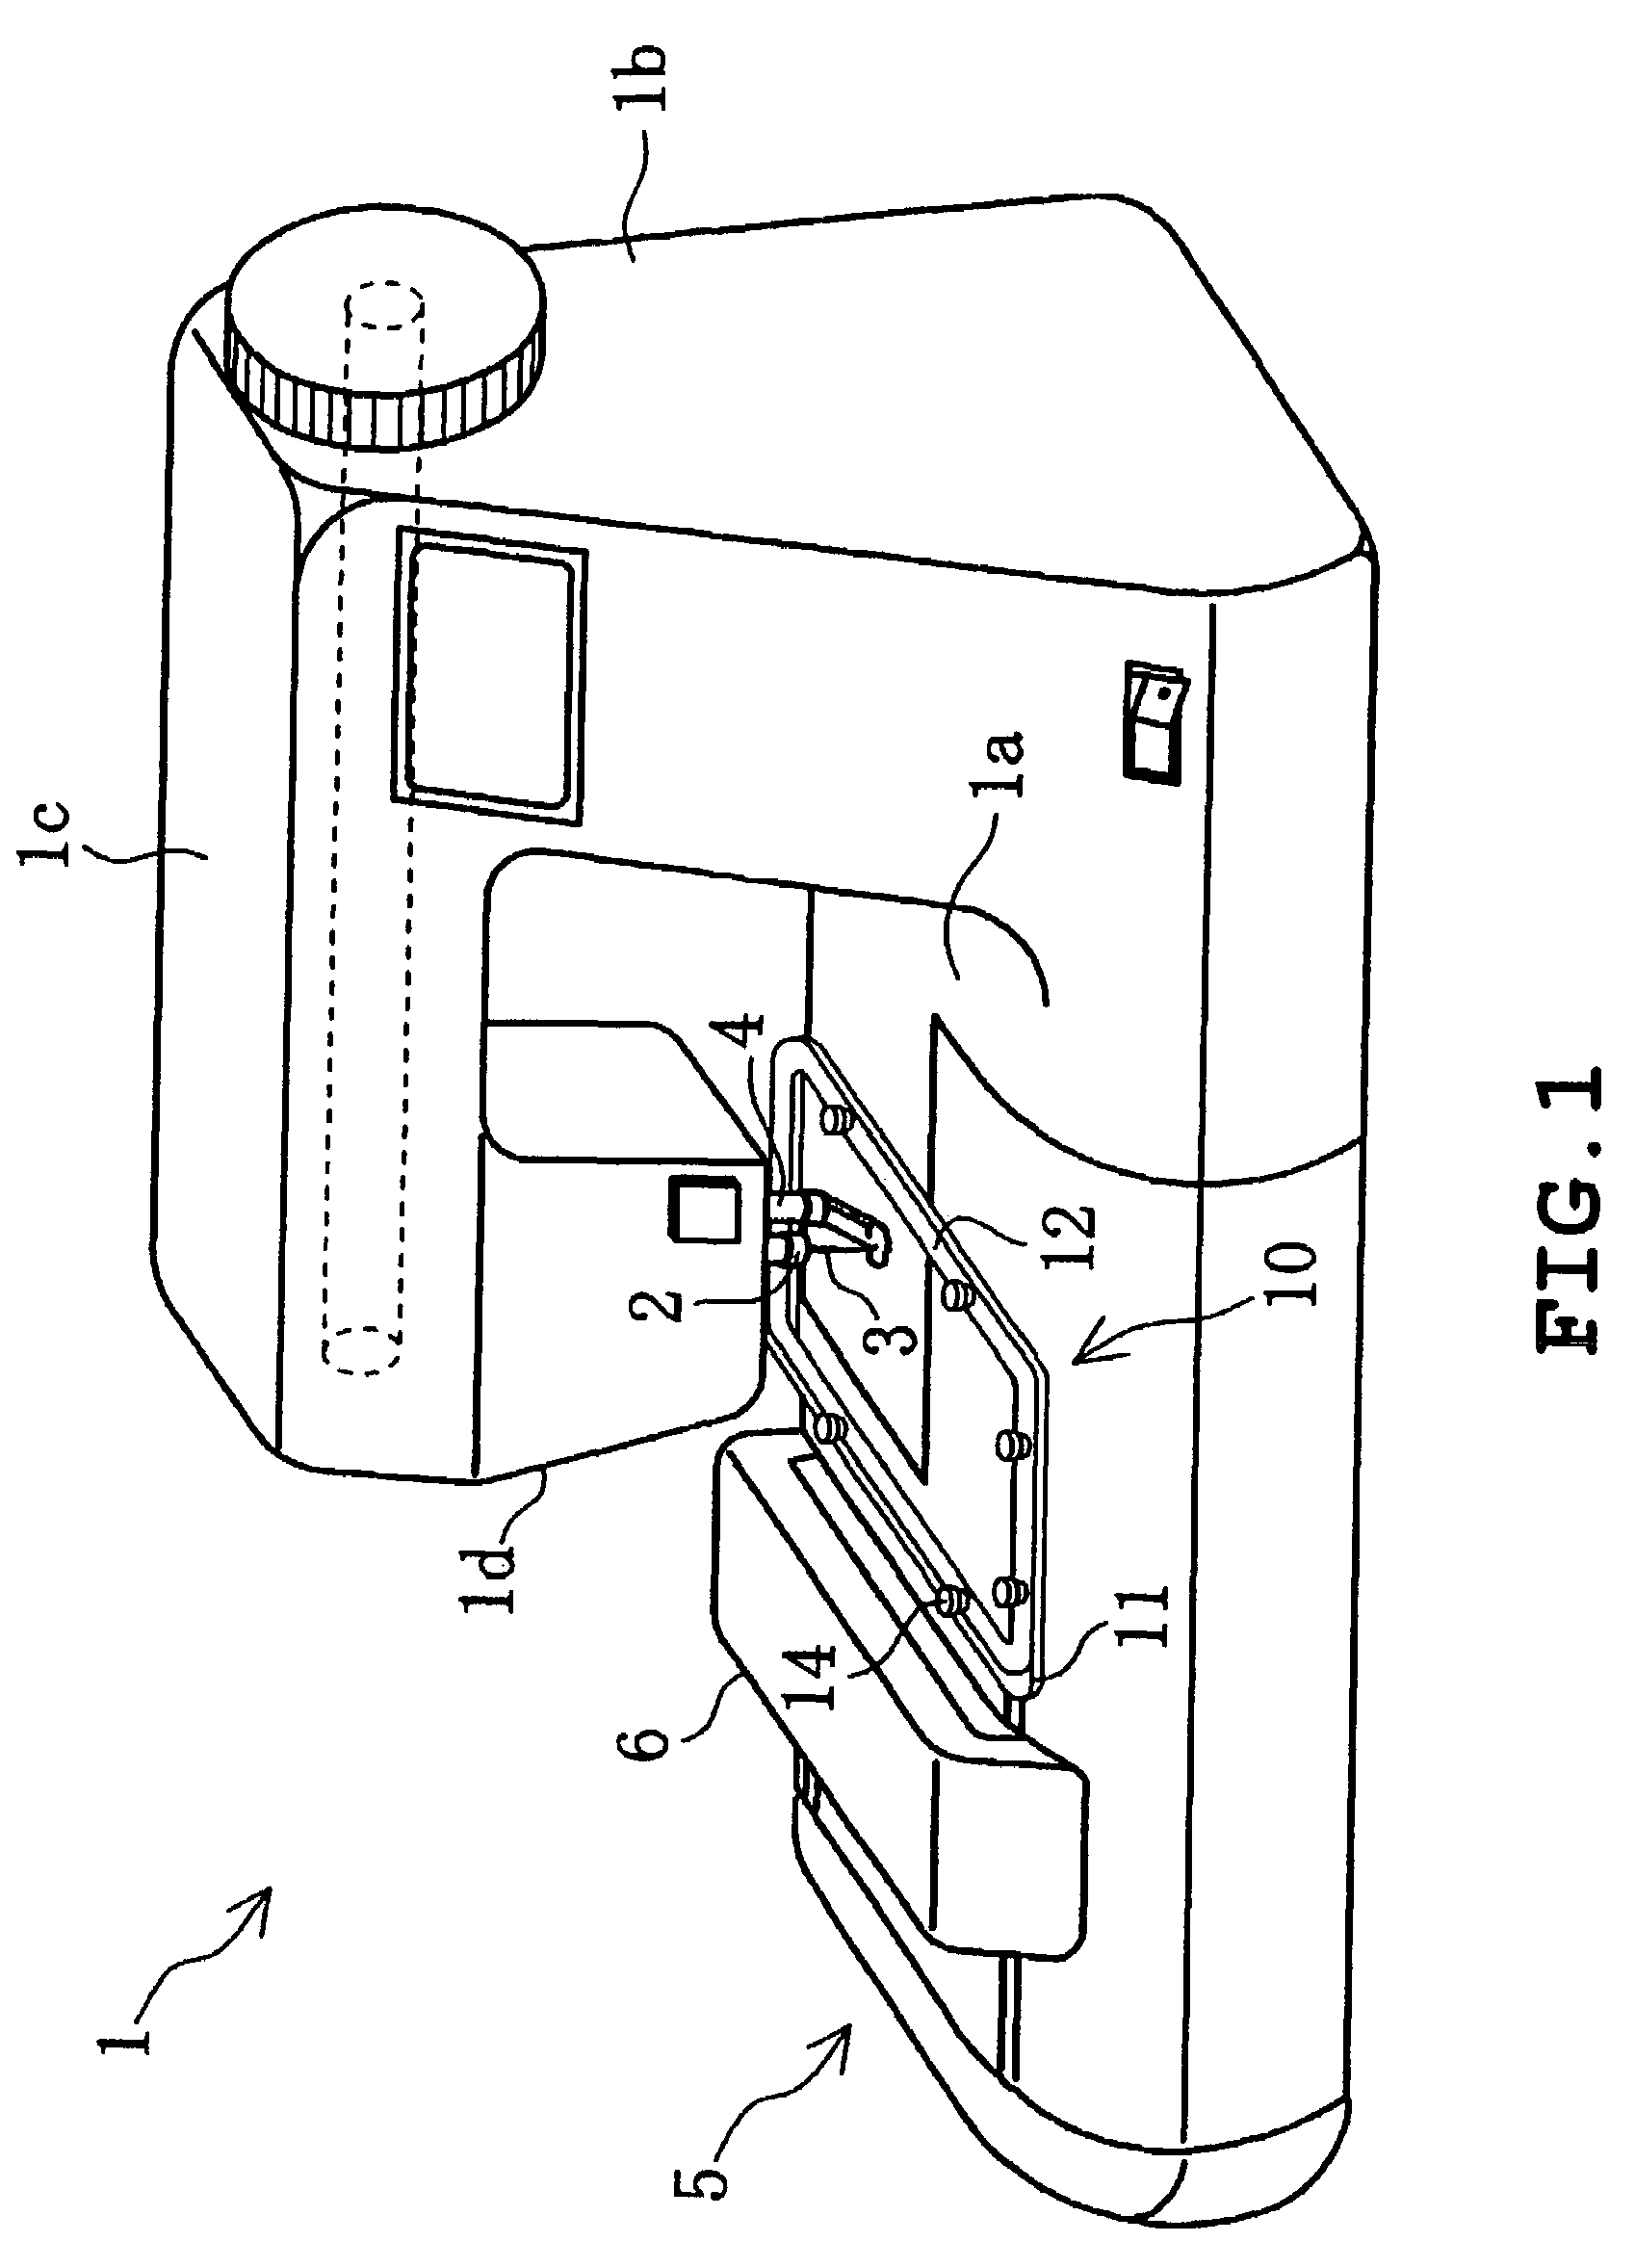 Cloth holding device